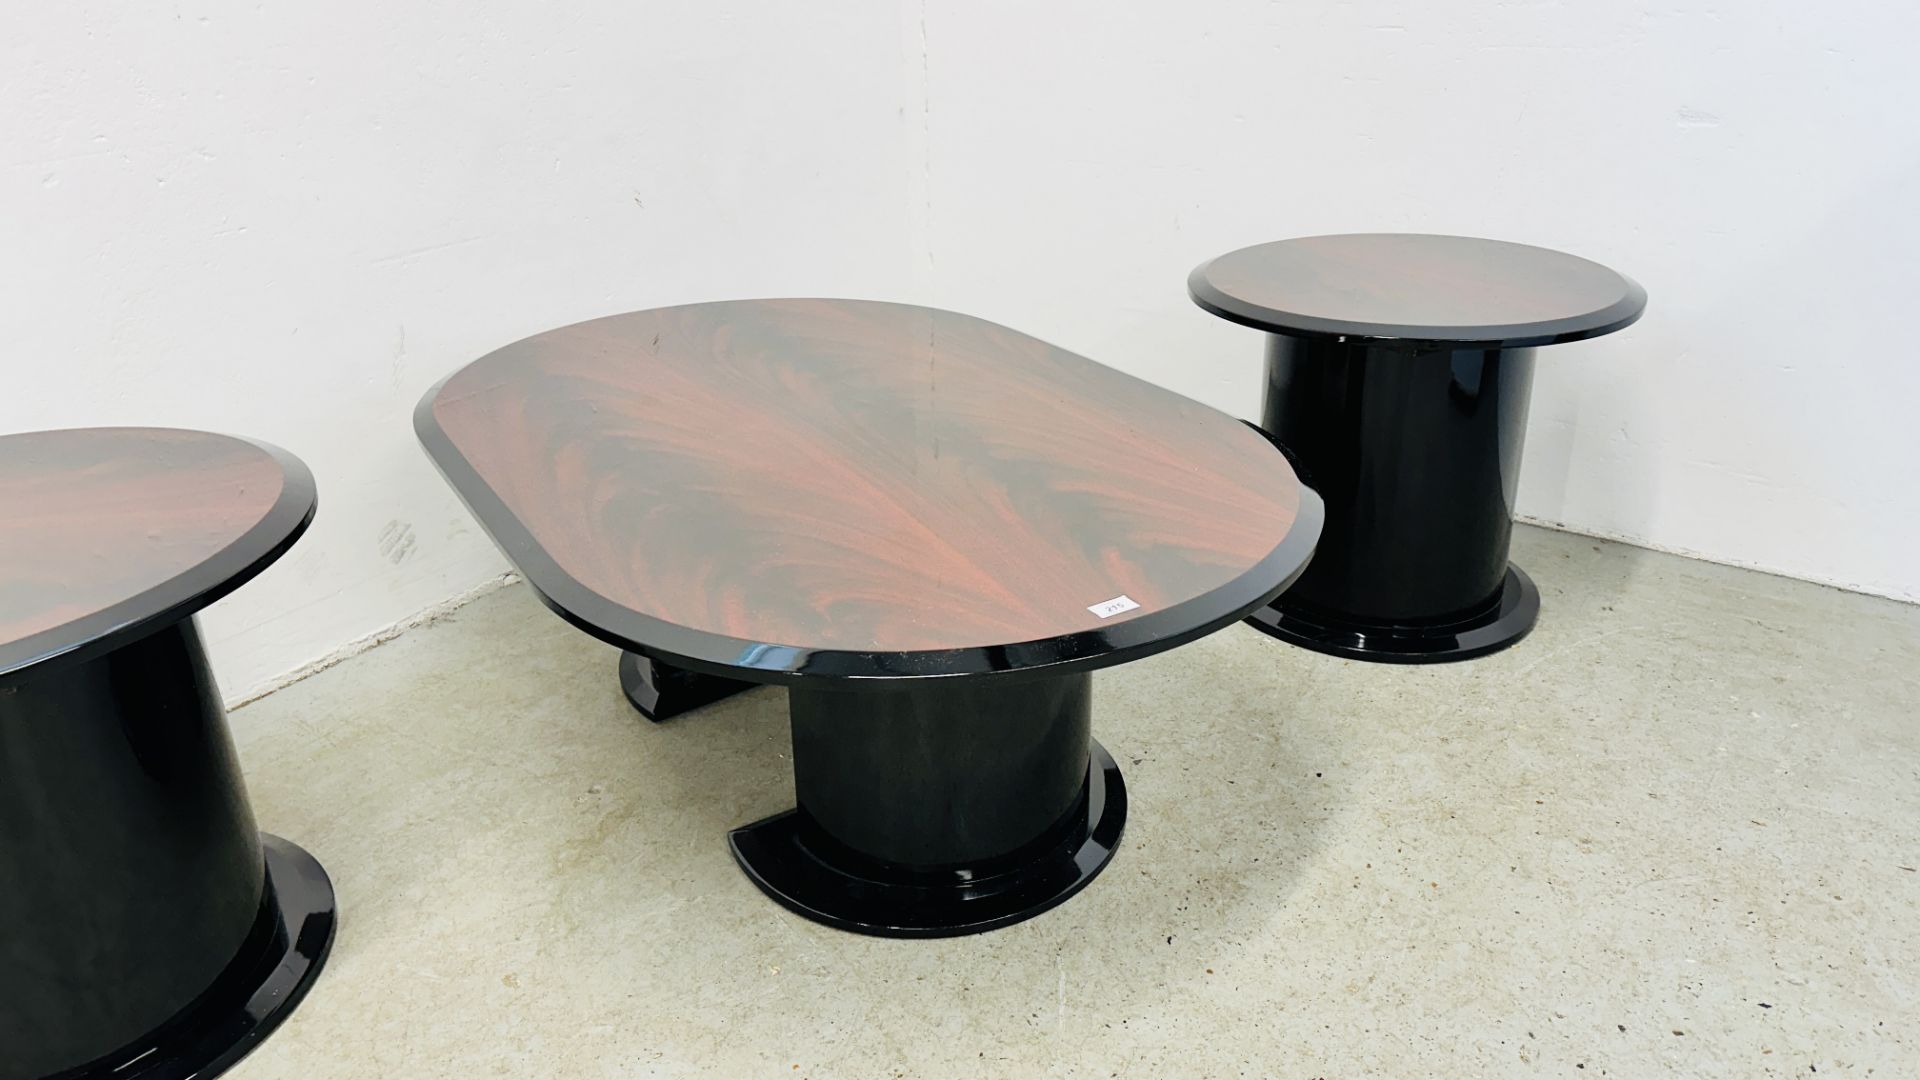 3 MATCHING DESIGN HIGH GLOSS MAHOGANY FINISH COFFEE TABLES INCLUDING A PAIR OF CIRCULAR AND 1 OVAL. - Image 2 of 16